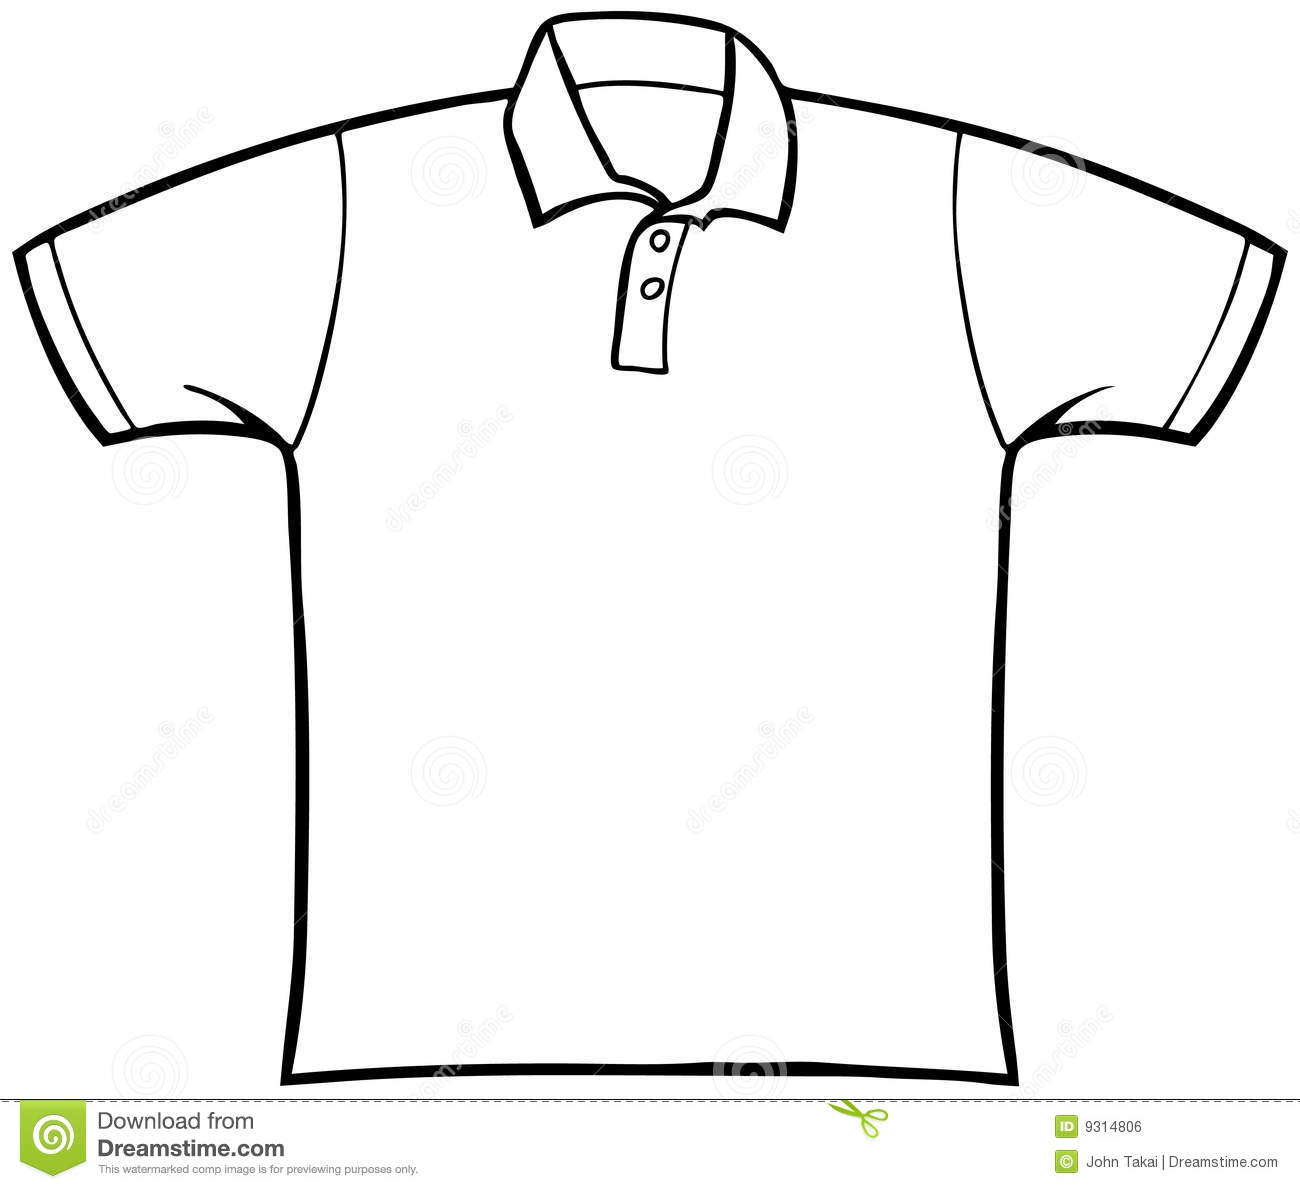 You Can Download Images For Dress Shirt Clipart In Your Computer By